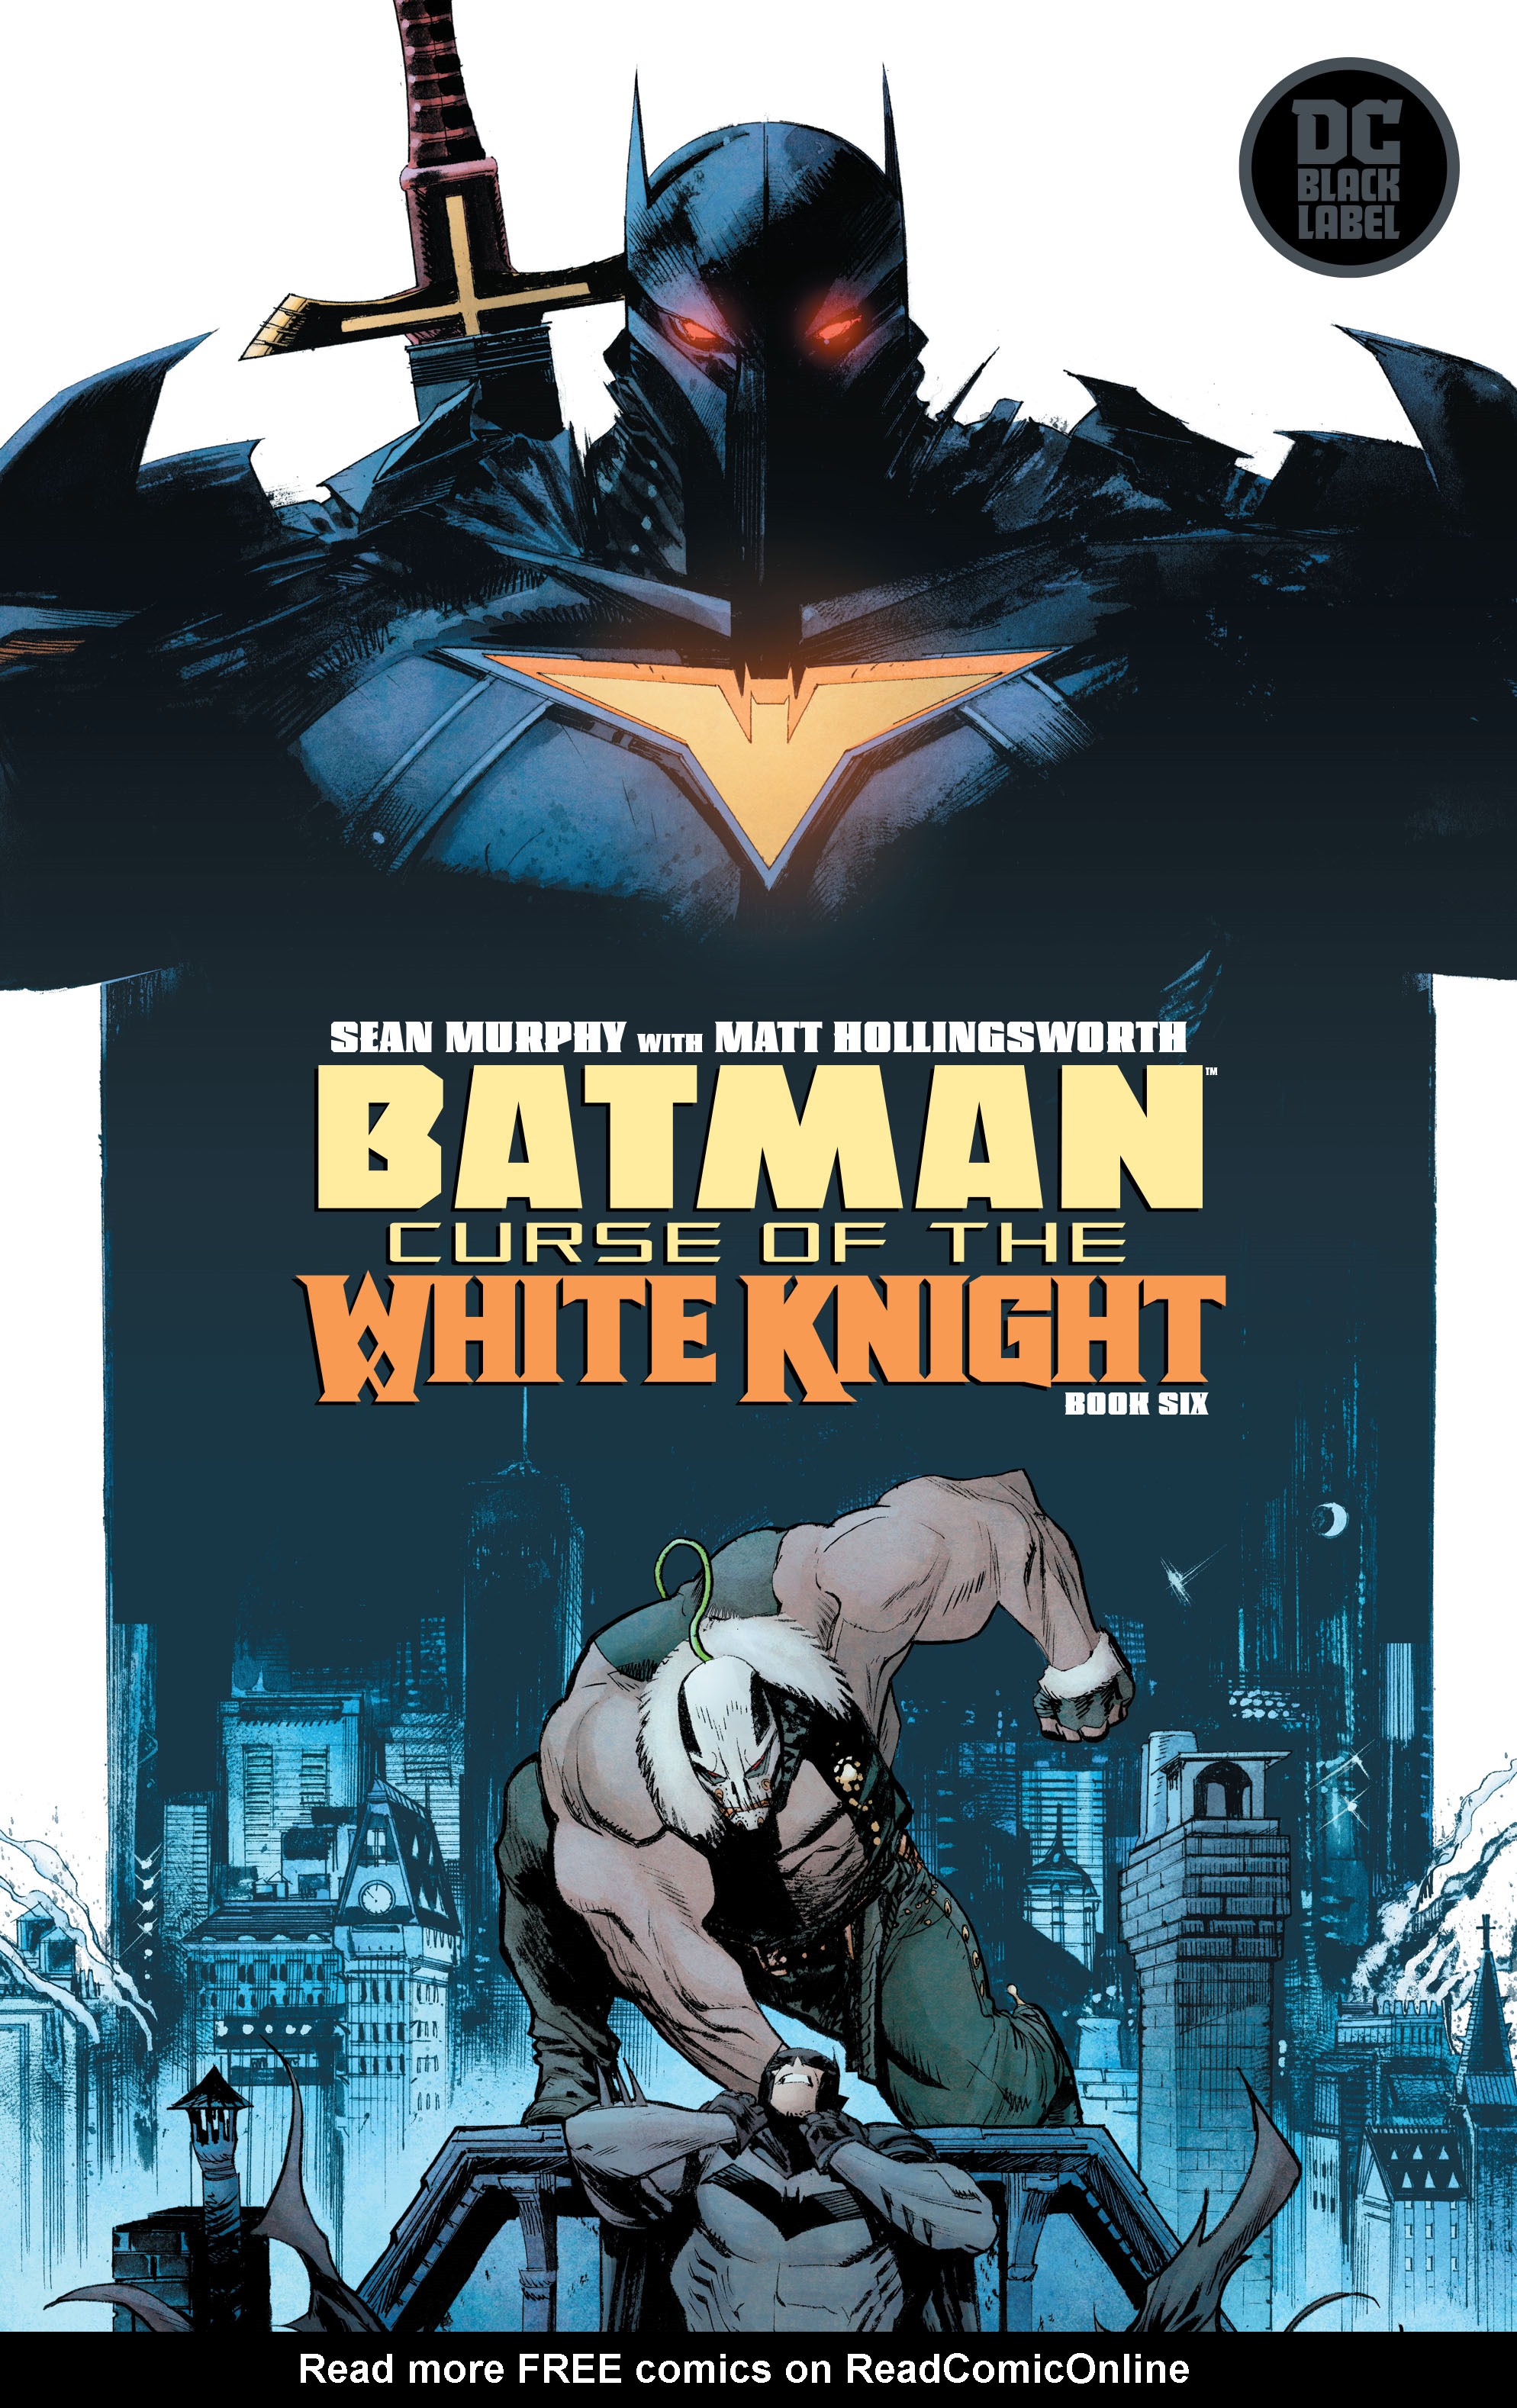 Batman Curse Of The White Knight Issue 6 | Read Batman Curse Of The White  Knight Issue 6 comic online in high quality. Read Full Comic online for  free - Read comics